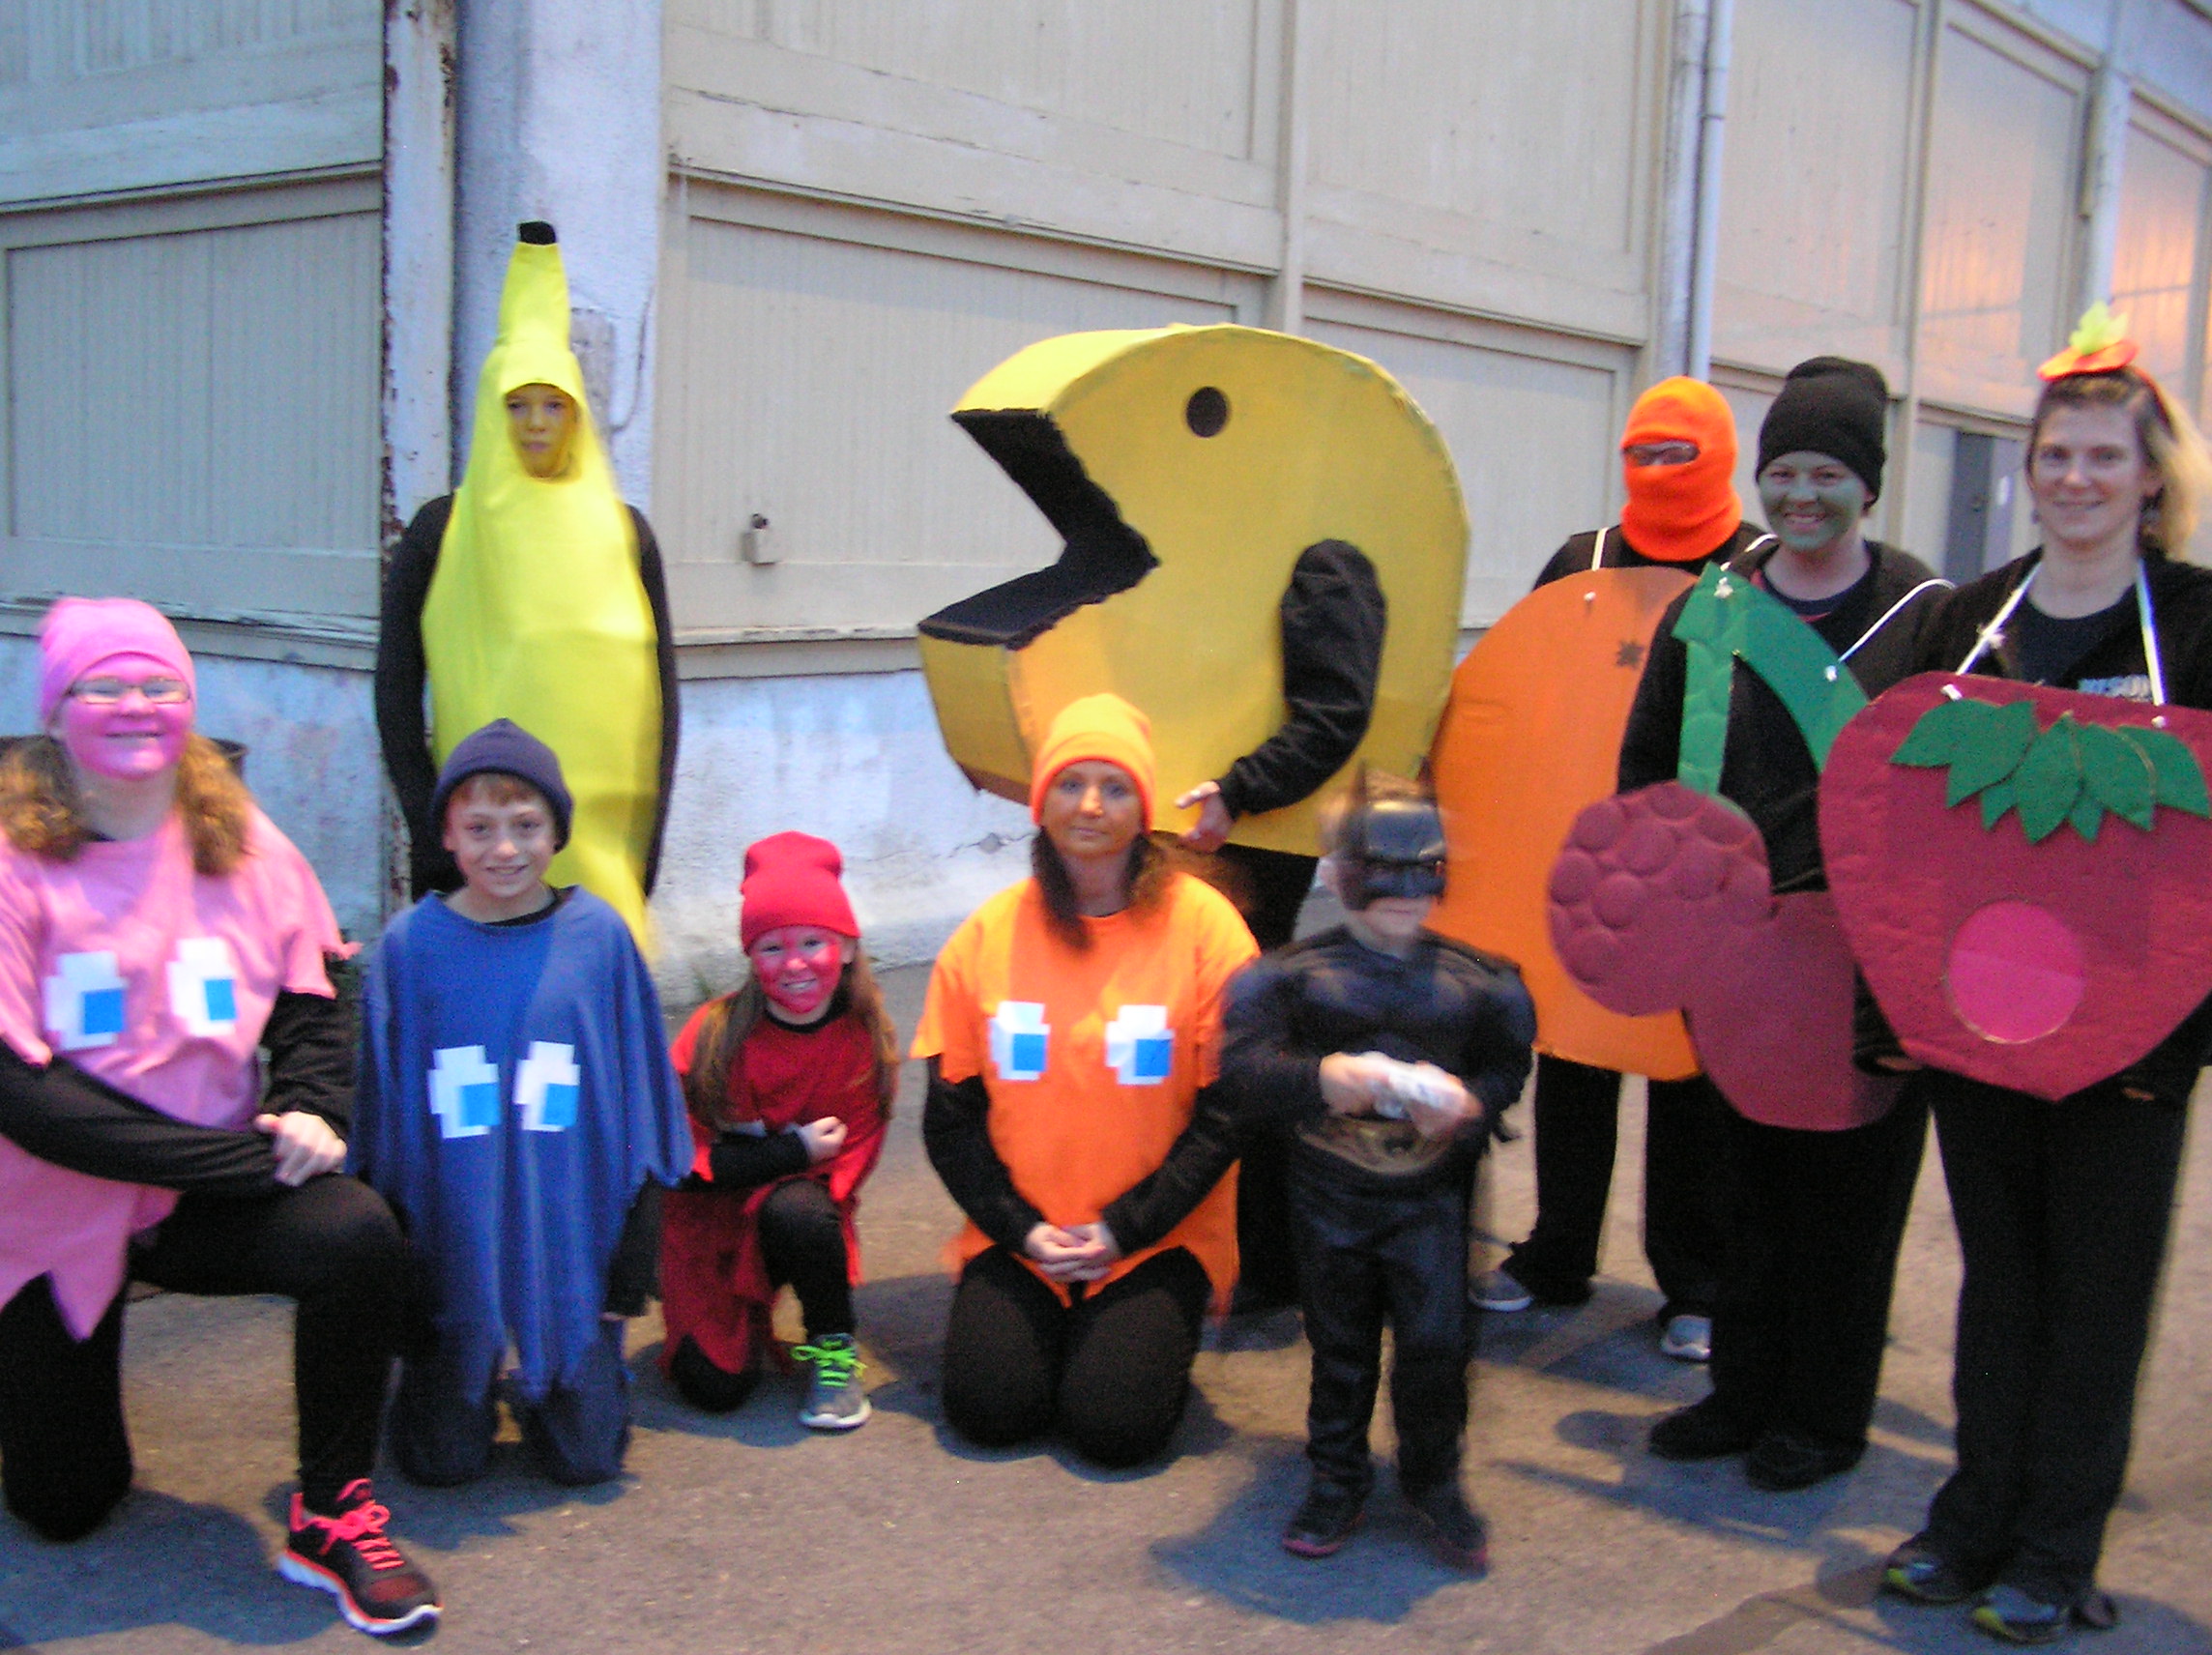 A group of gamers representing  the "Primitive Me" Gift Shop in Clearfield sports a "Pac Man" group costume theme at the annual Halloween Parade Tuesday night. Held by the Kiwanis Club, this year's parade theme was "Hotel Transylvania." Prizes were given for best group costume, best individual costume, best float and for the costume that best captures the parade's theme. (Photo by Kimberly Finnigan)